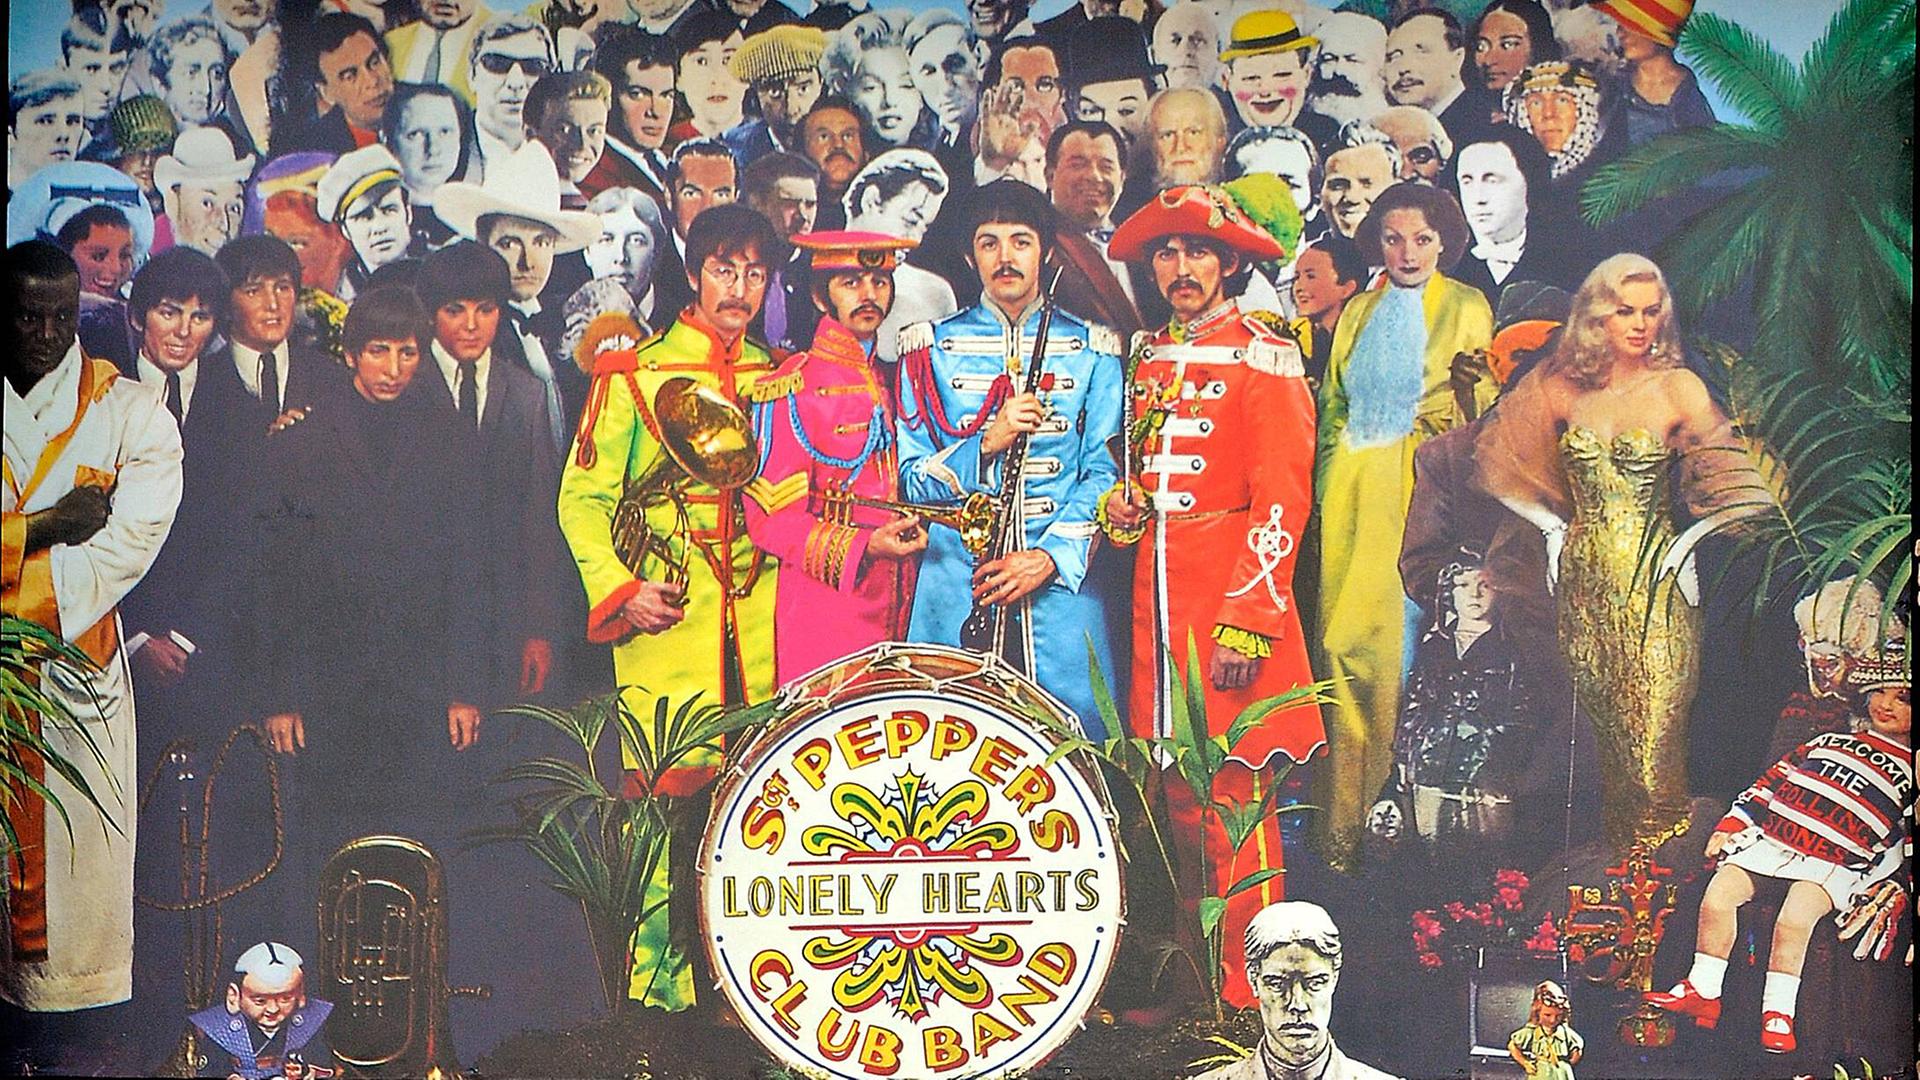 Das Cover des Beatles-Albums "Sgt. Pepper's Lonely Hearts Club Band"